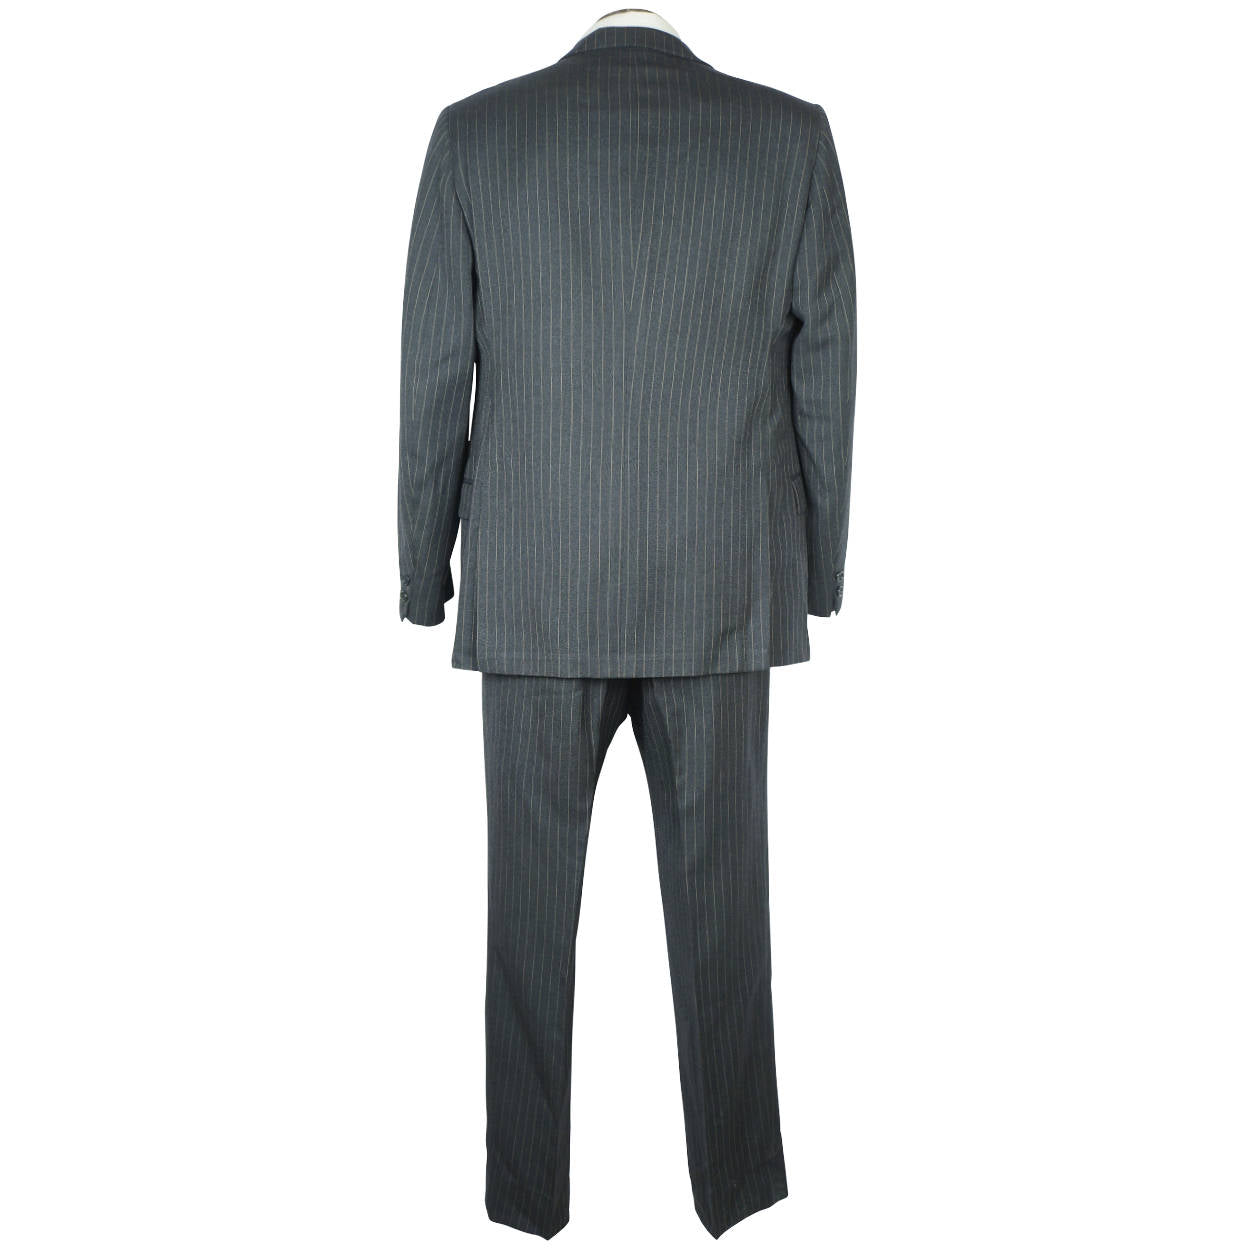 Vintage 1960s Mens Suit Charcoal Grey w Pinstripe Custom Tailor Dated ...